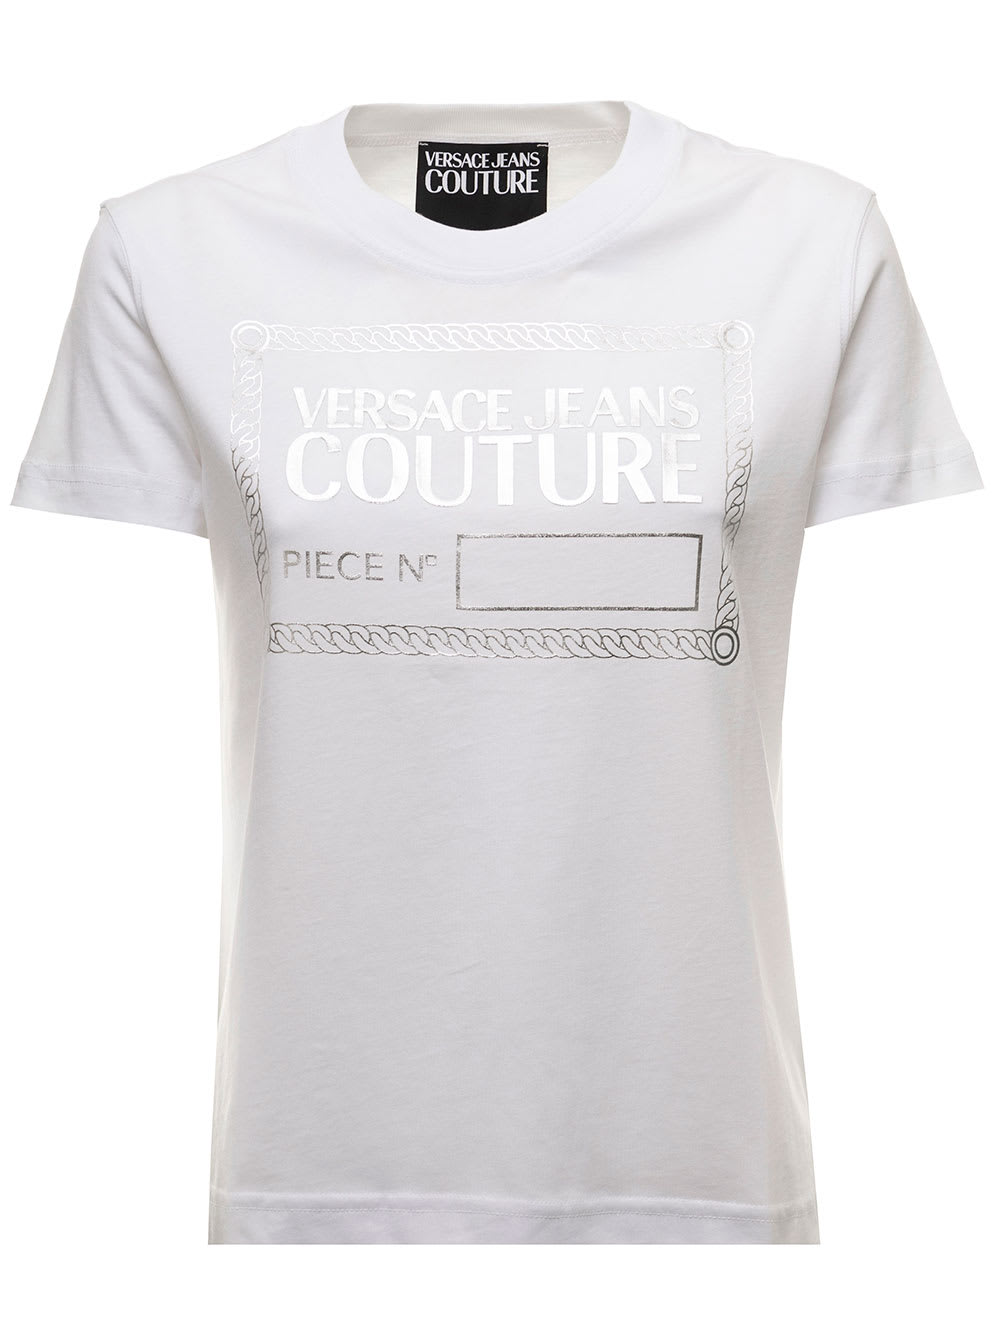 Versace Jeans Couture White T-shirt In Jhersey With Silver-tone Foi Logo Print